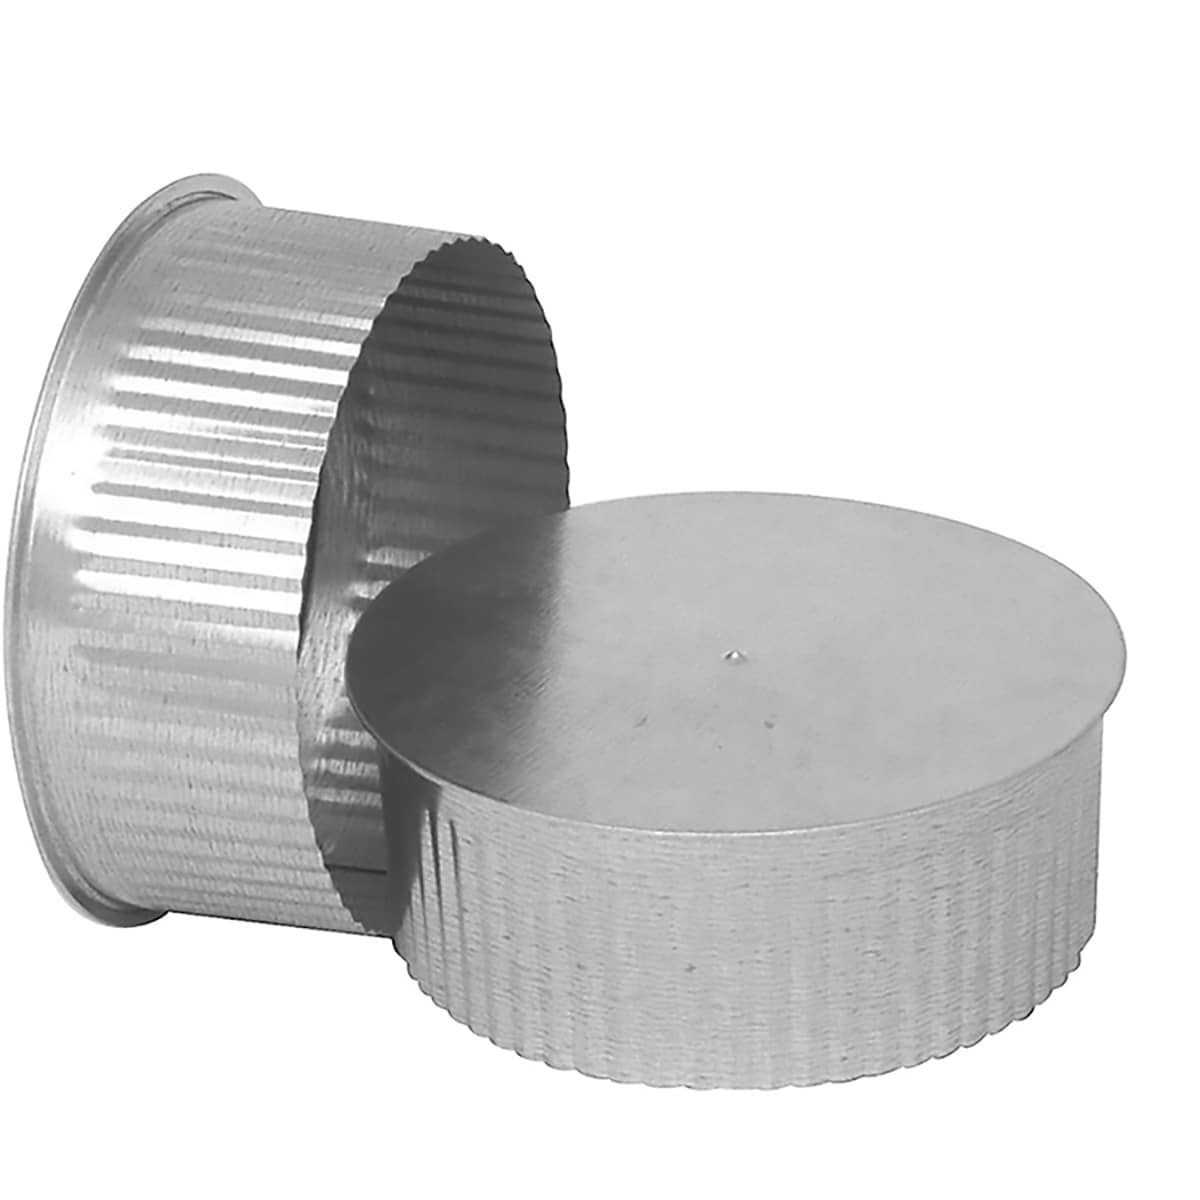 What is a pipe end cap used for?